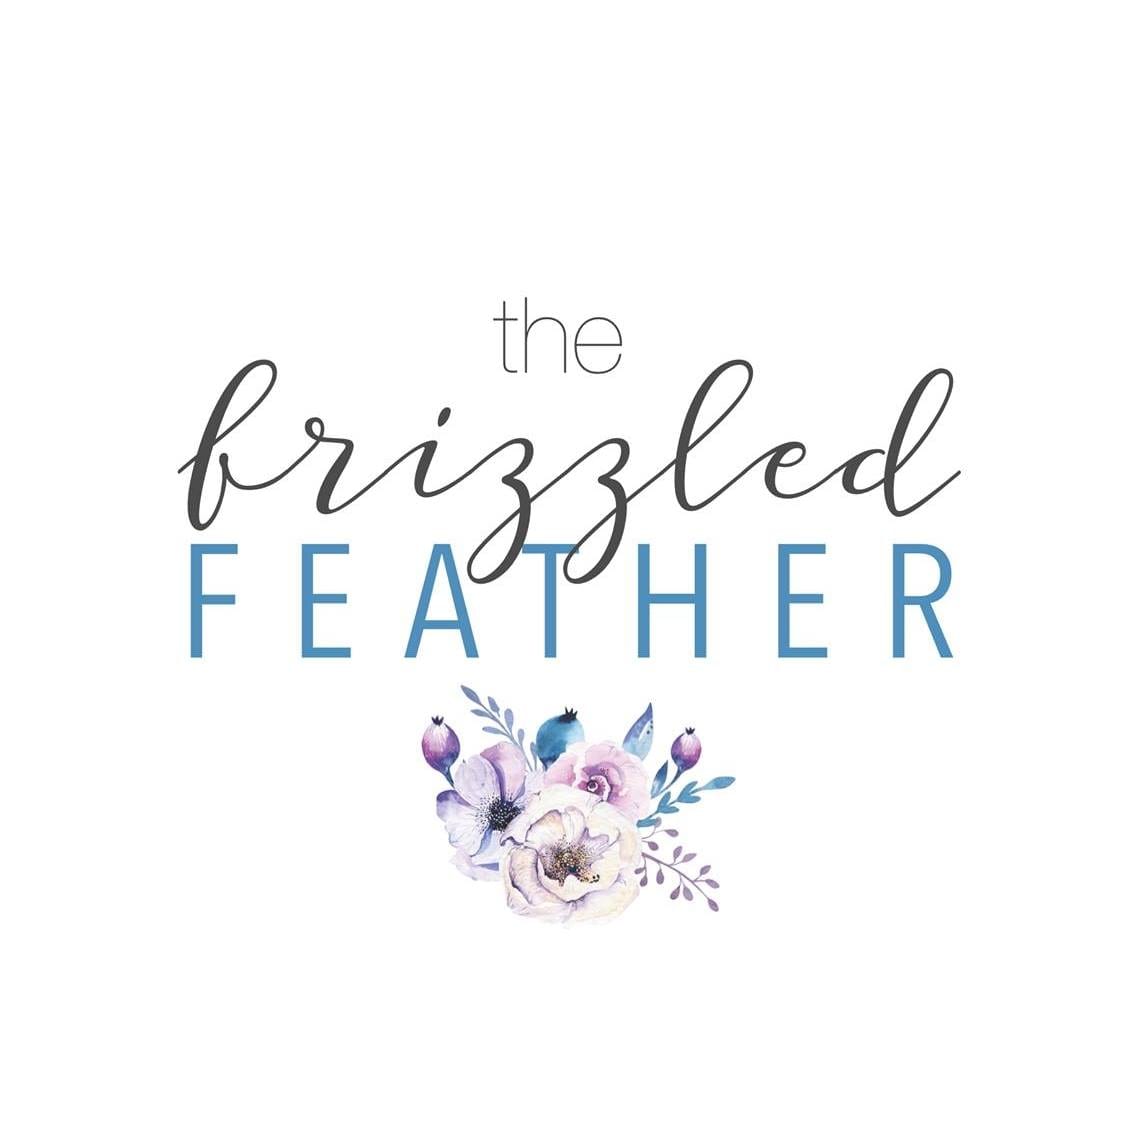 The Fizzled Feather logo